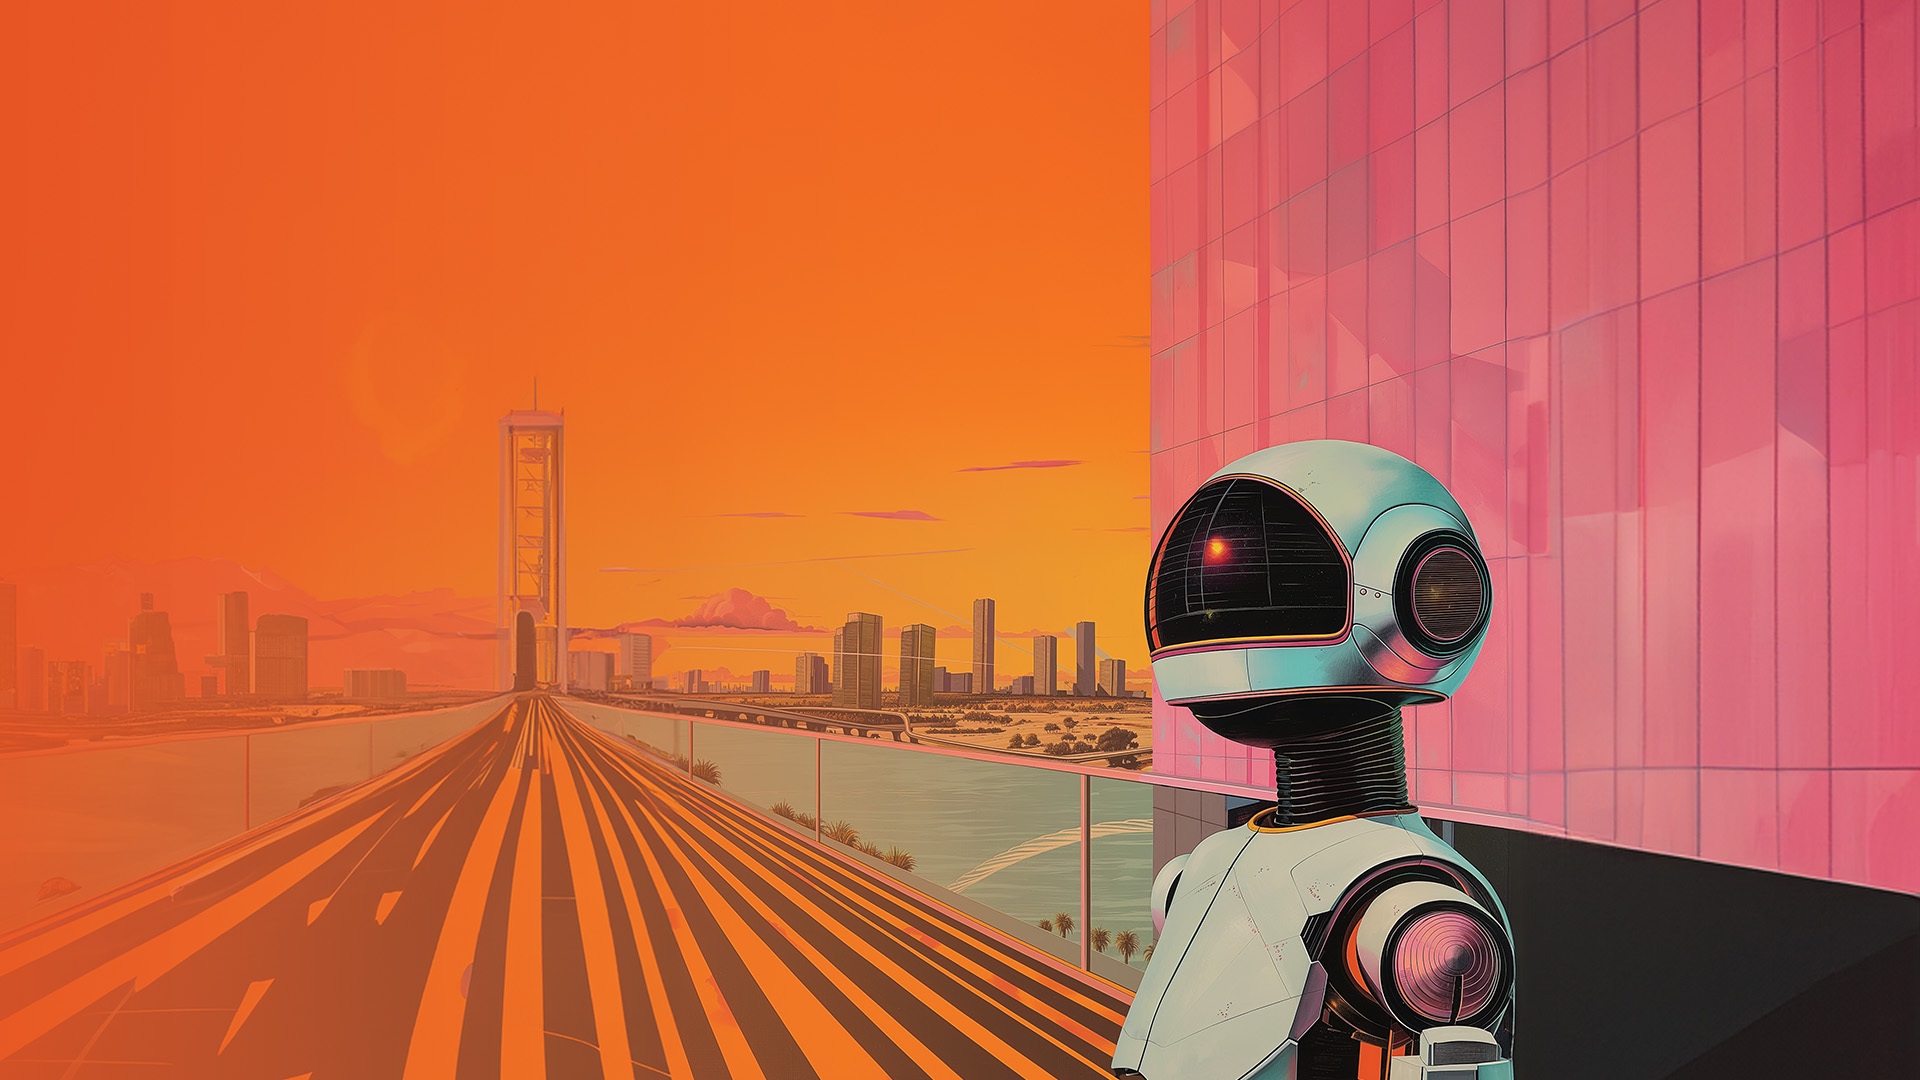 Image of futuristic city in the background with a robot in the foreground